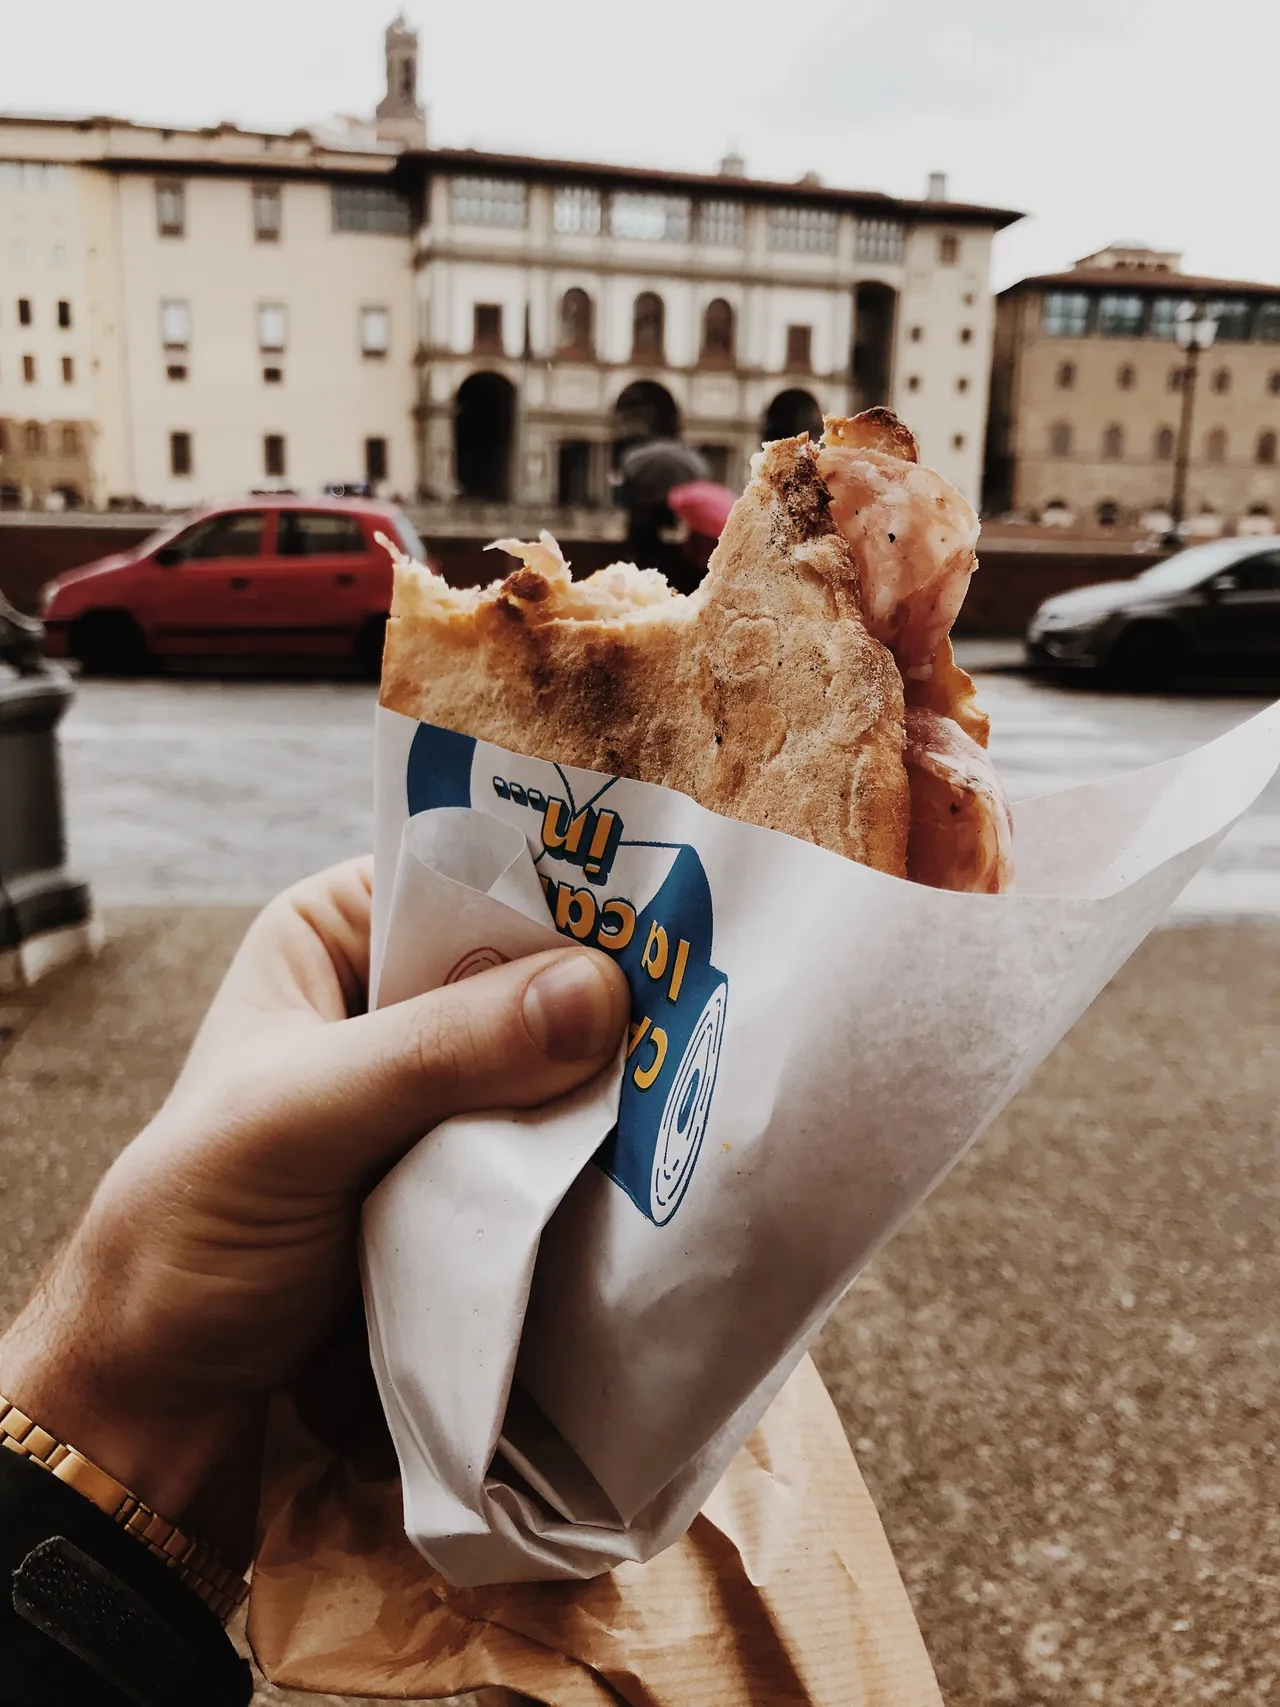 Hand holding with pita sandwich wrapped in paper in an outside plaza